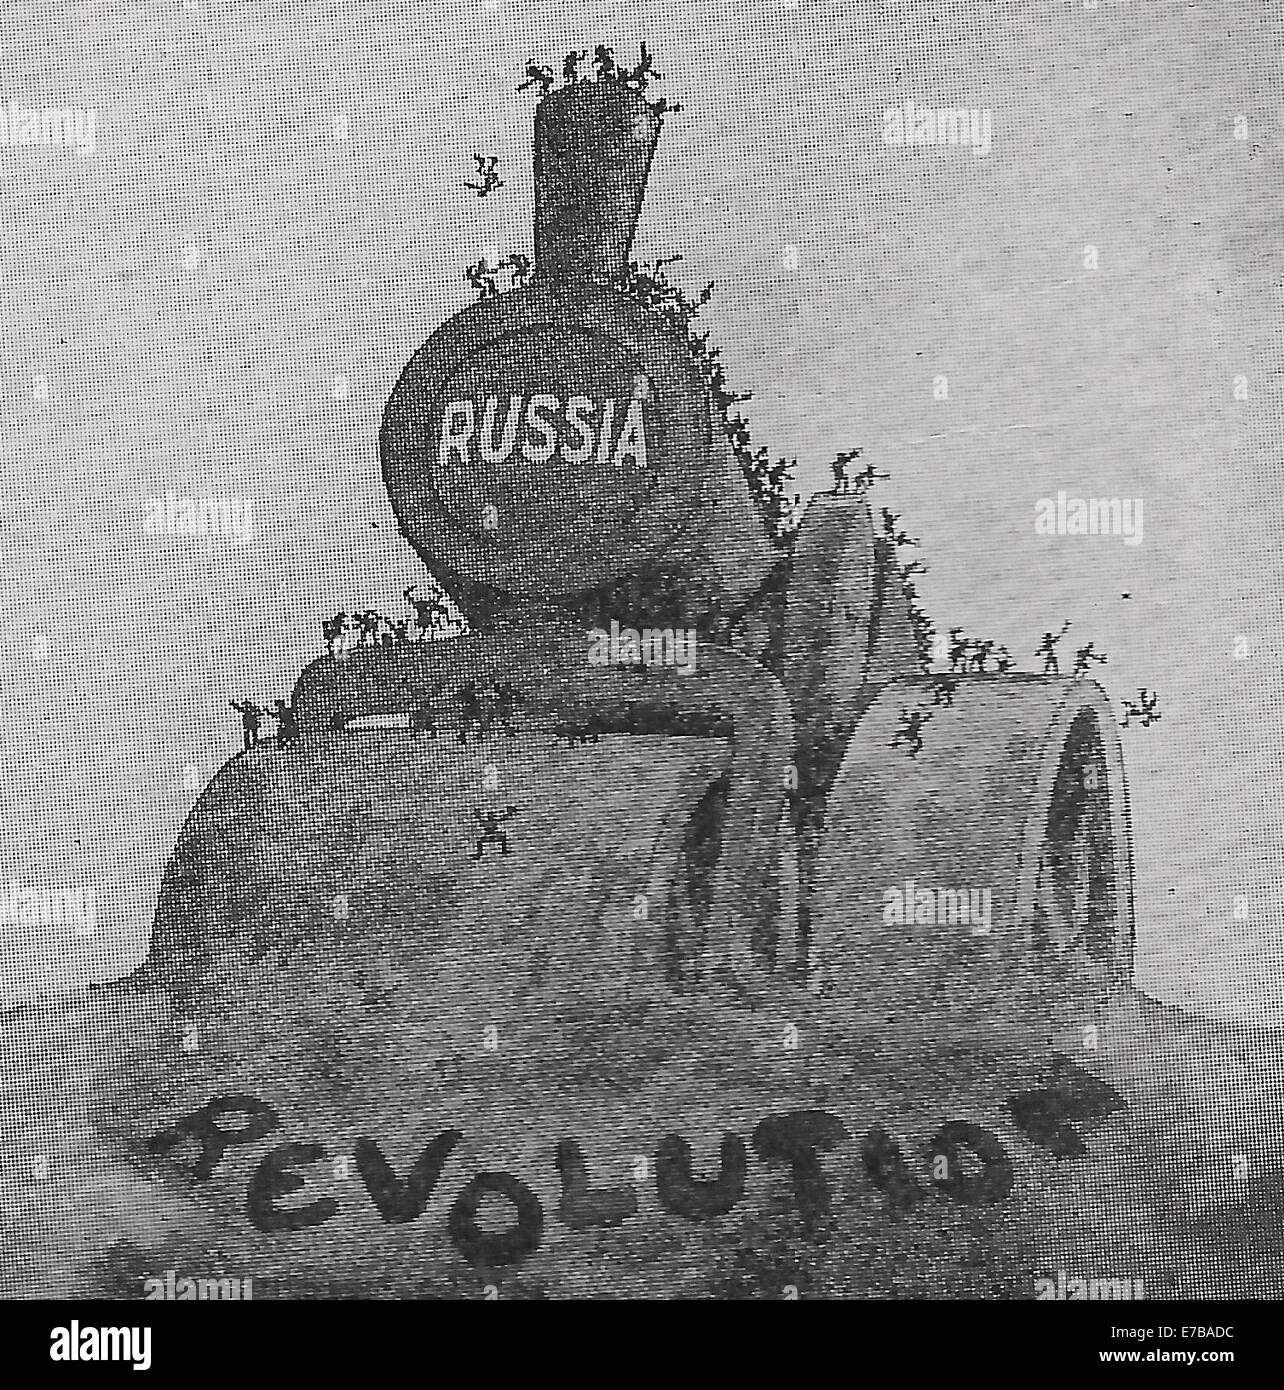 Political Cartoon - January 1918 Stuck in the Mud - The Russian Revolution unable to steamroll ahead Stock Photo